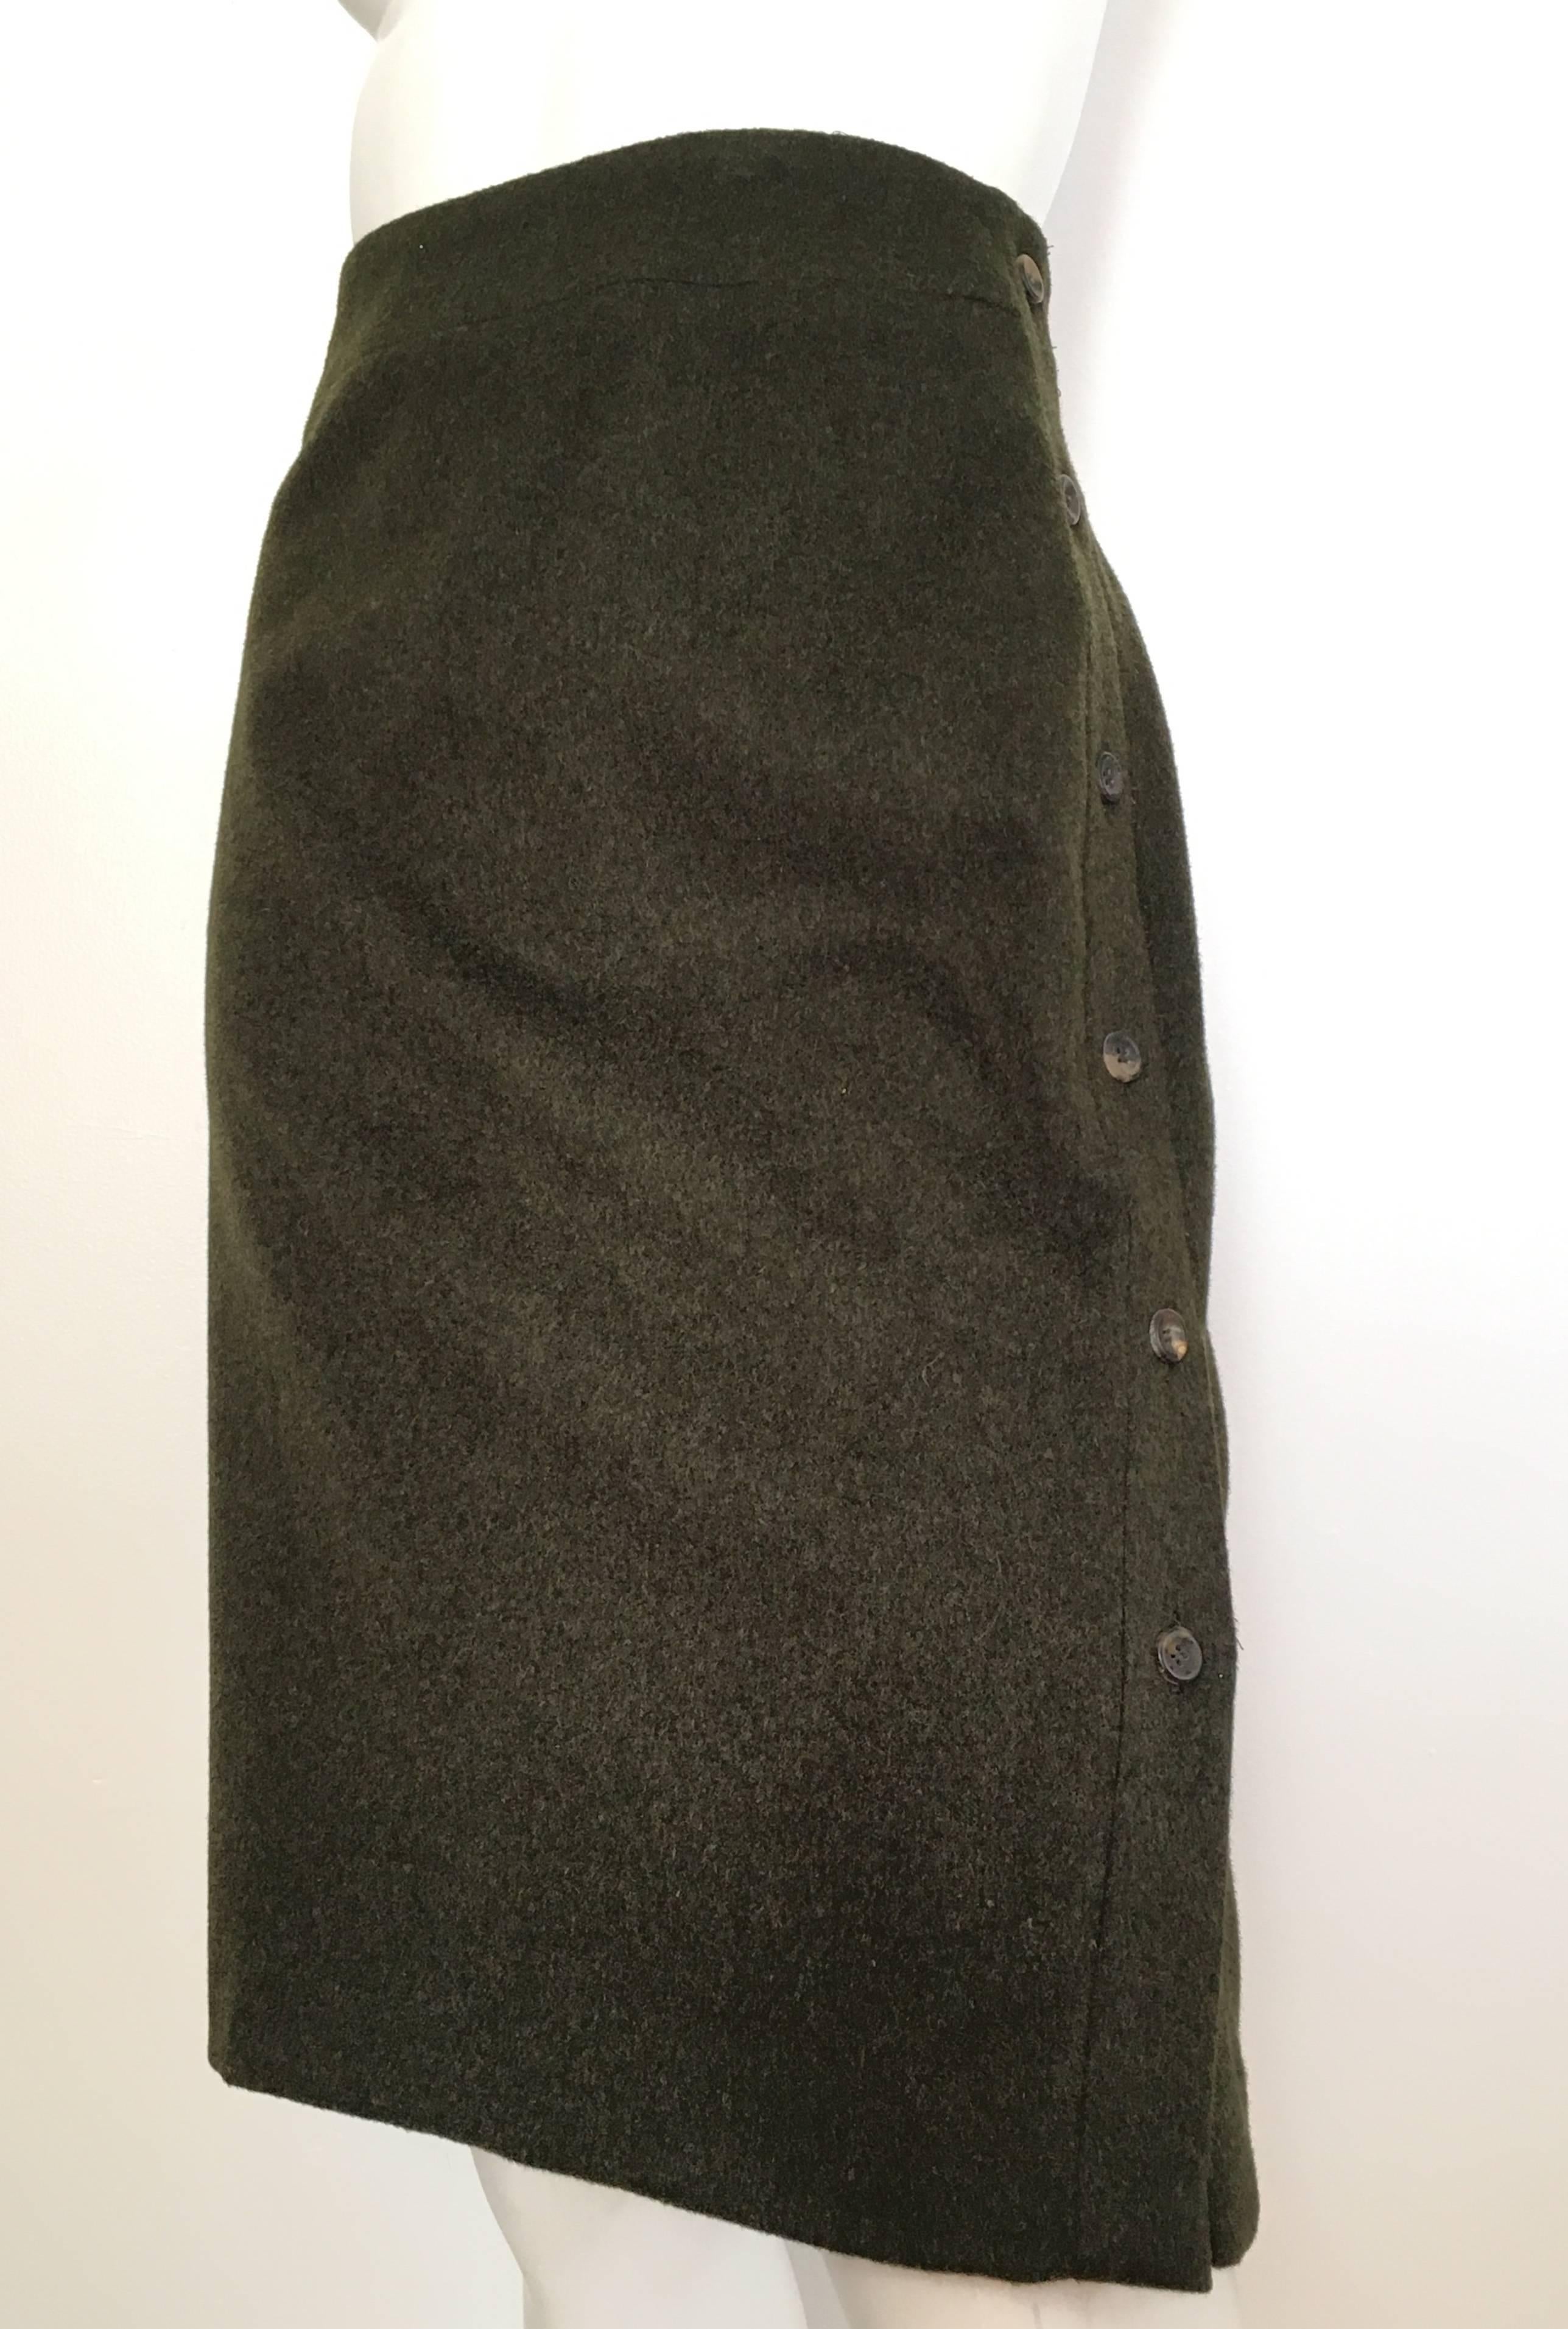 Carolina Herrera for Saks Olive Brushed Wool Skirt Size 10 Made in Italy. For Sale 1